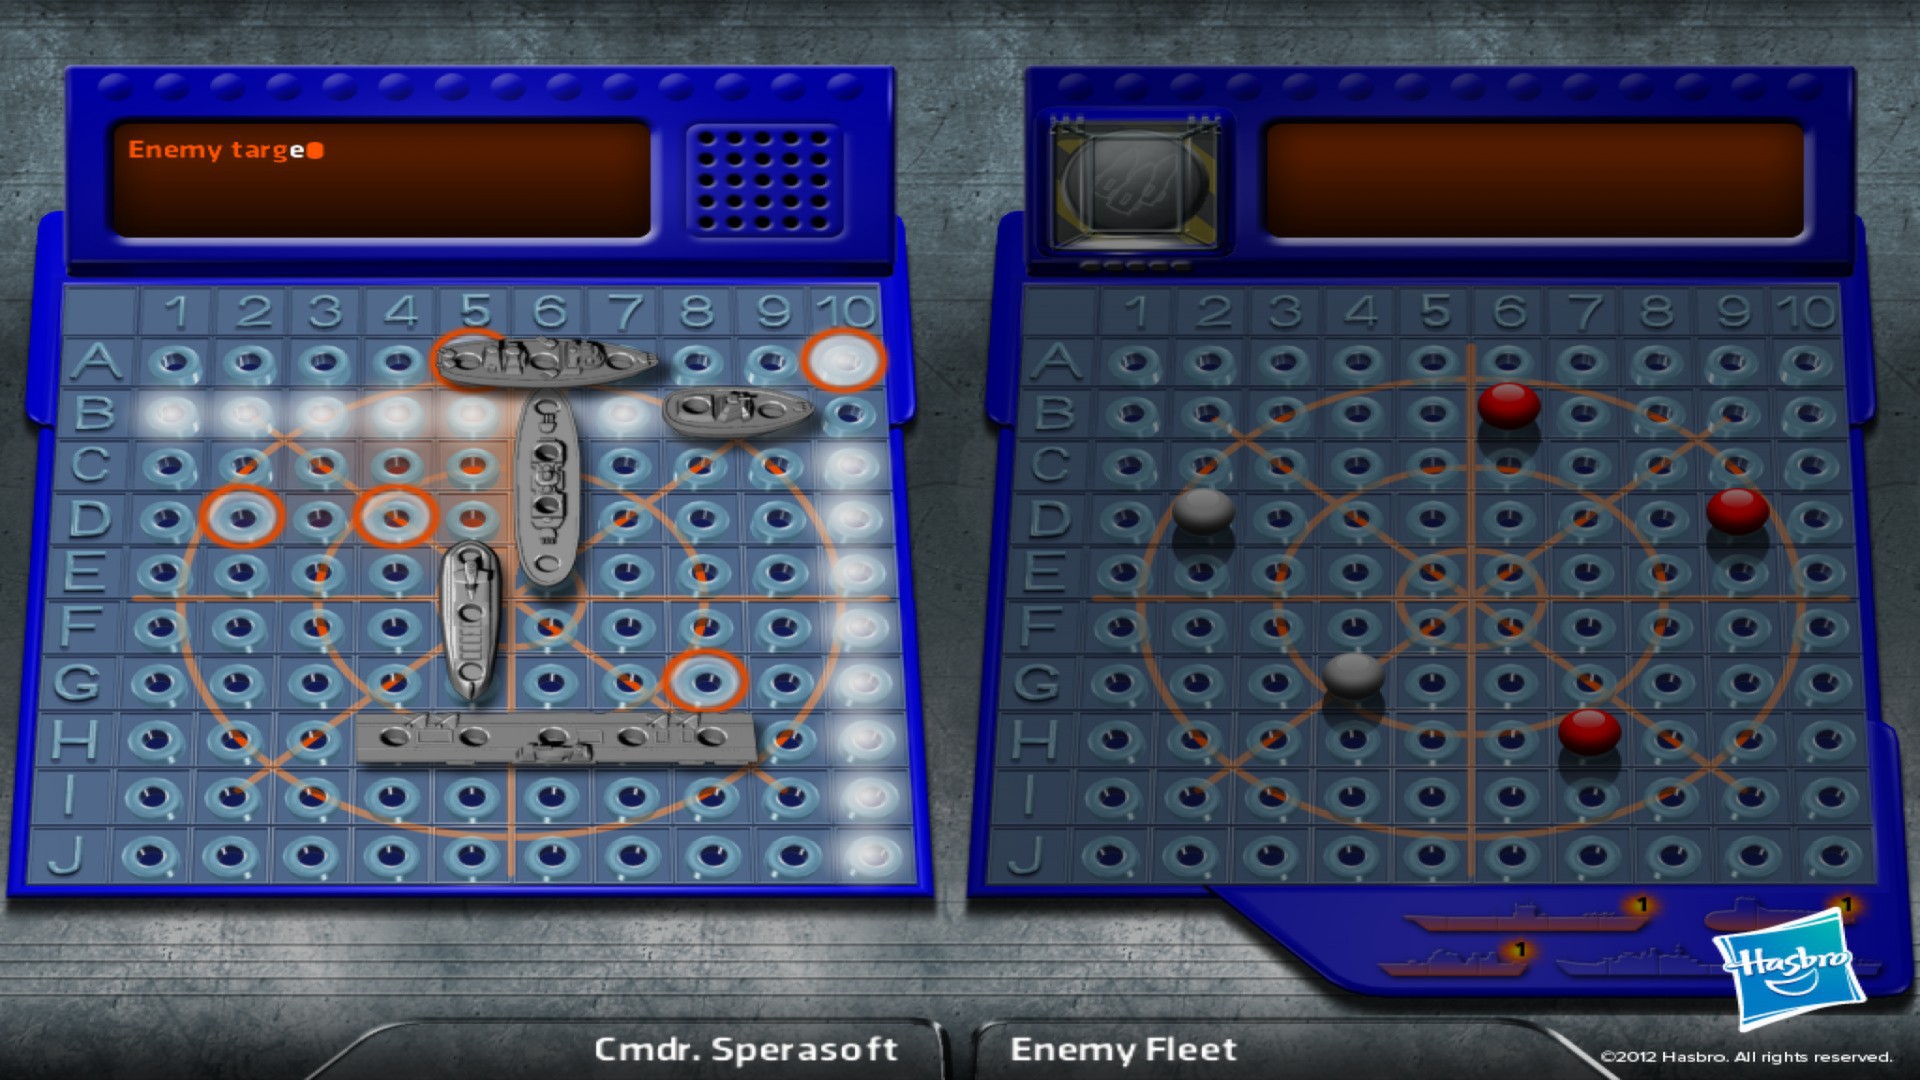 private game of battleship online free